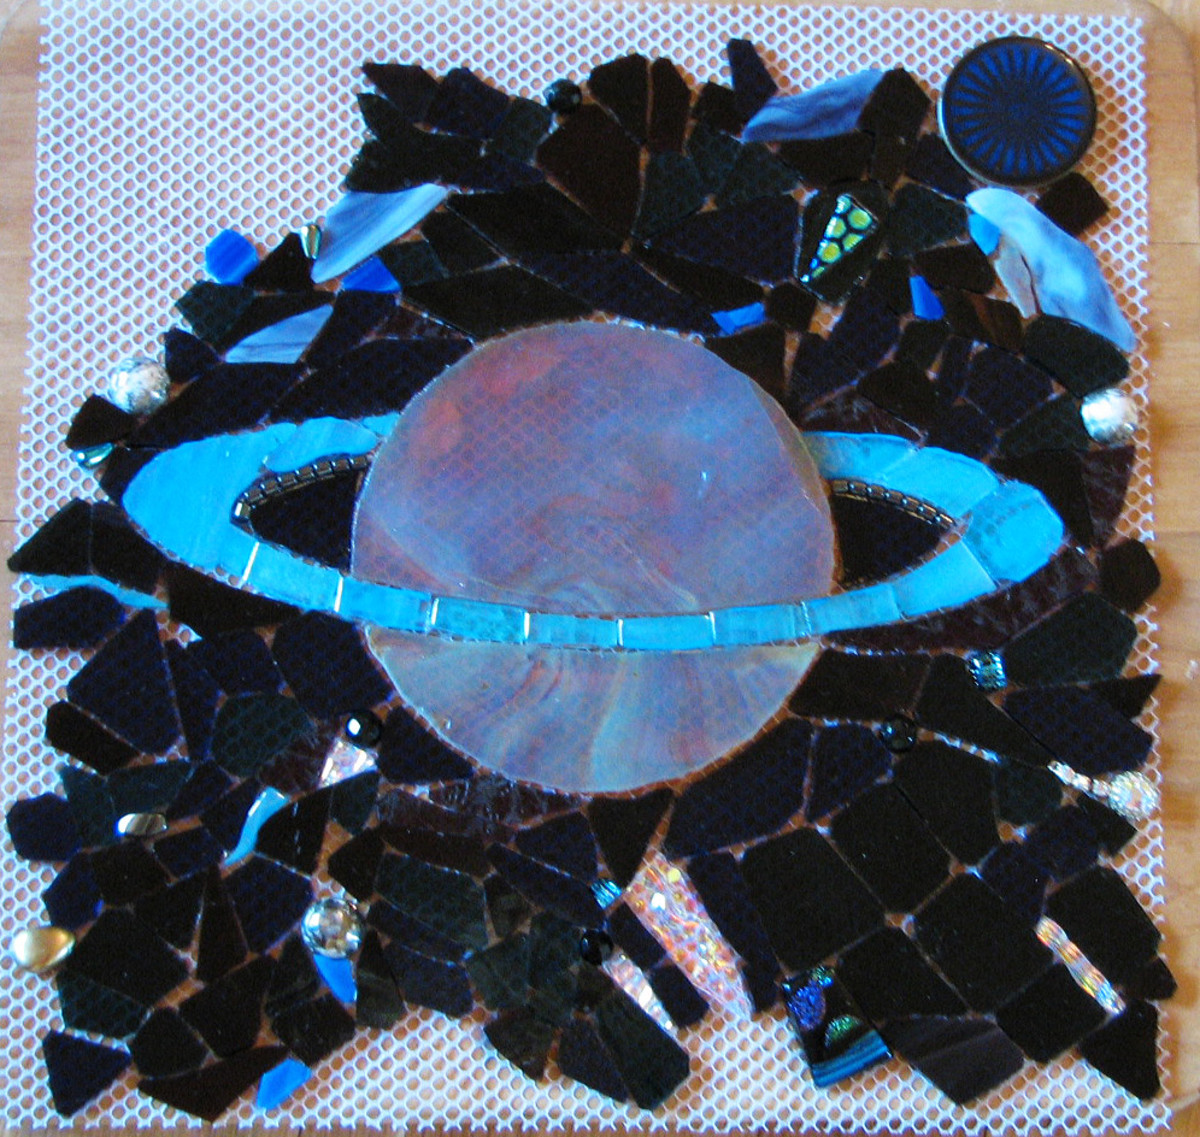 This is a small piece of a much larger mosaic featuring outer space, stained glass, costume jewelry, pearls, beads, and dichroic glass on mesh, to be applied to Wedi.  